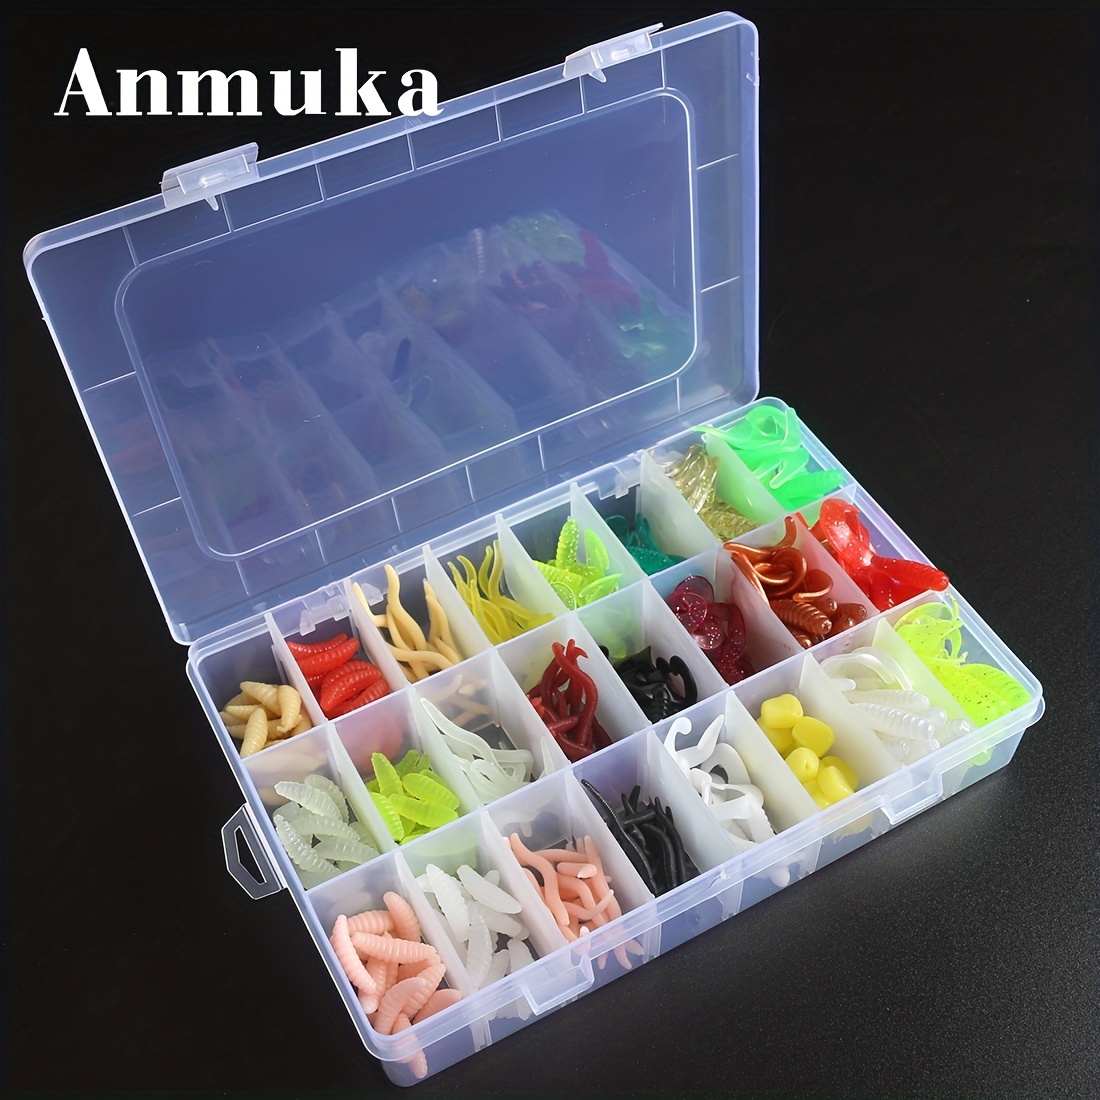 285pcs/190pcs Premium Soft Fishing Lures Variety Pack - Includes Bread  Worms, Red Worms, Earthworms, Single and Double Tail Shrimp - Perfect for  Fresh